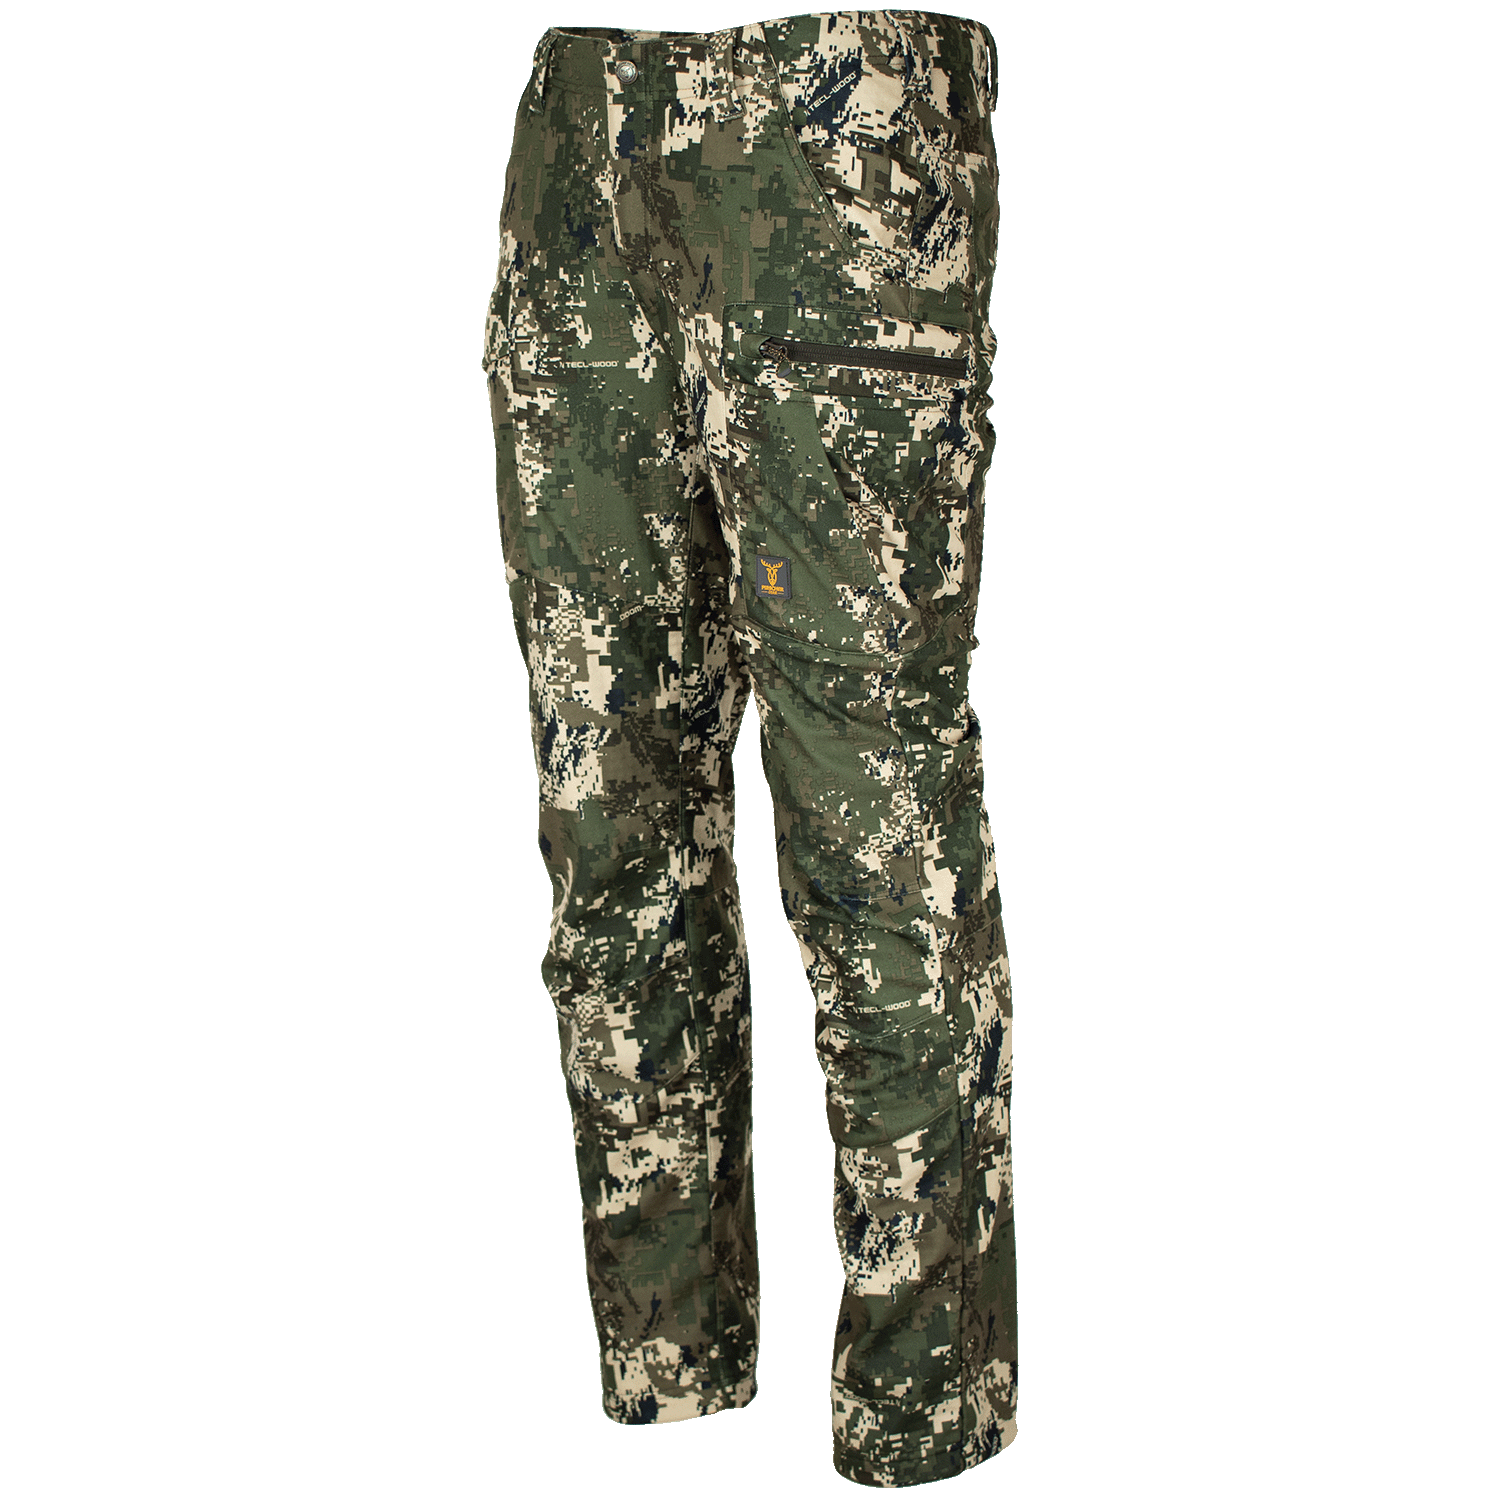 Pirscher Gear Silence Pro Pants (Optimax) - Hunting Trousers